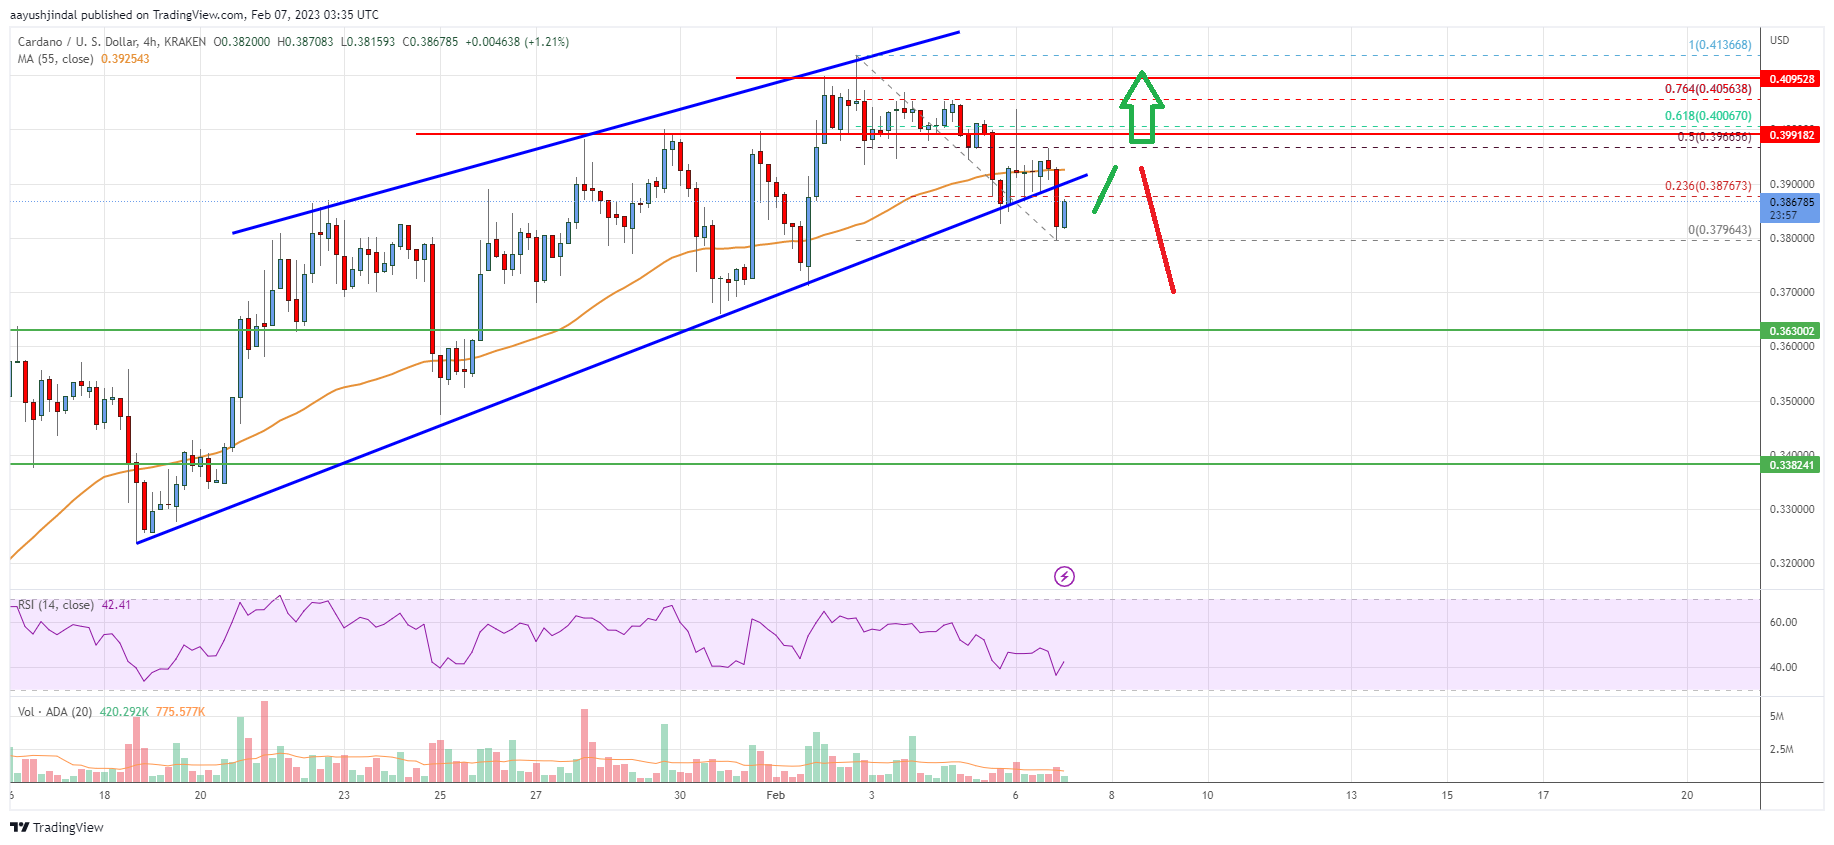 Cardano (ADA) Price Analysis: Downside Correction Could Be Limited